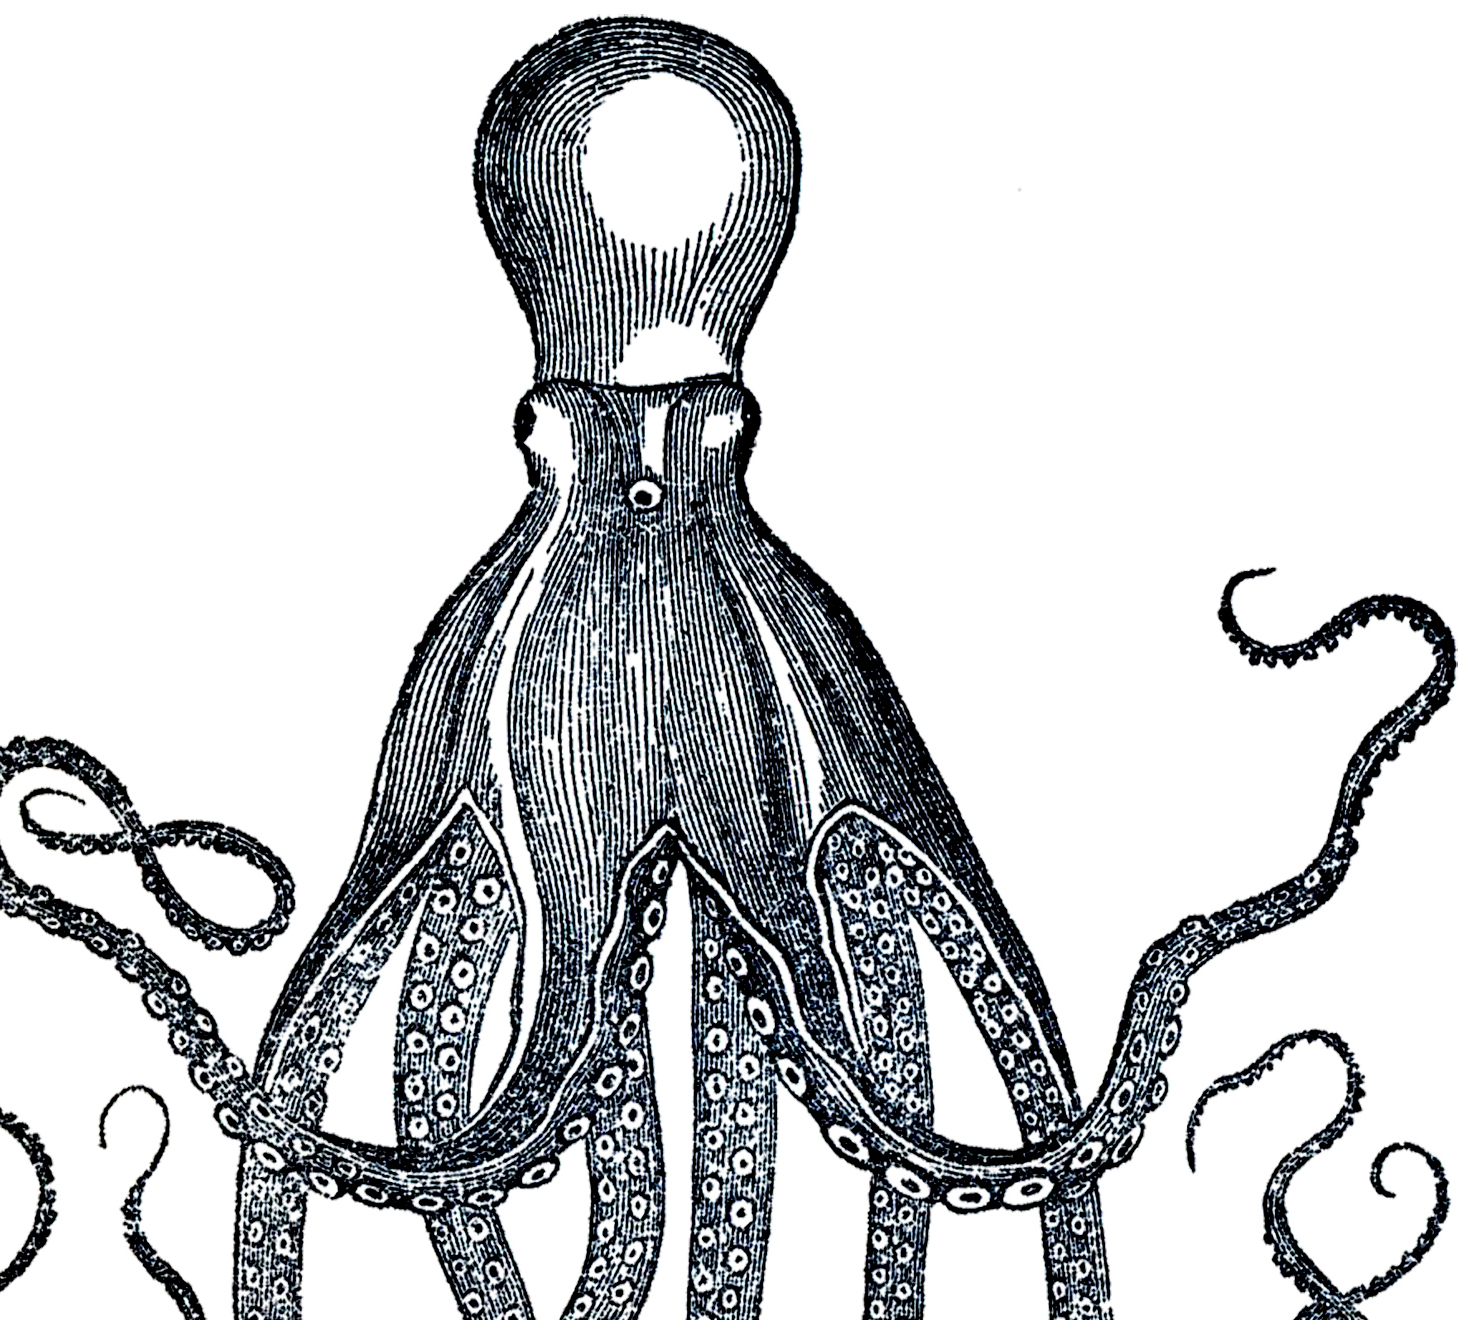 9 Octopus Clip Art Images - Cuttlefish Pictures! - The Graphics Fairy